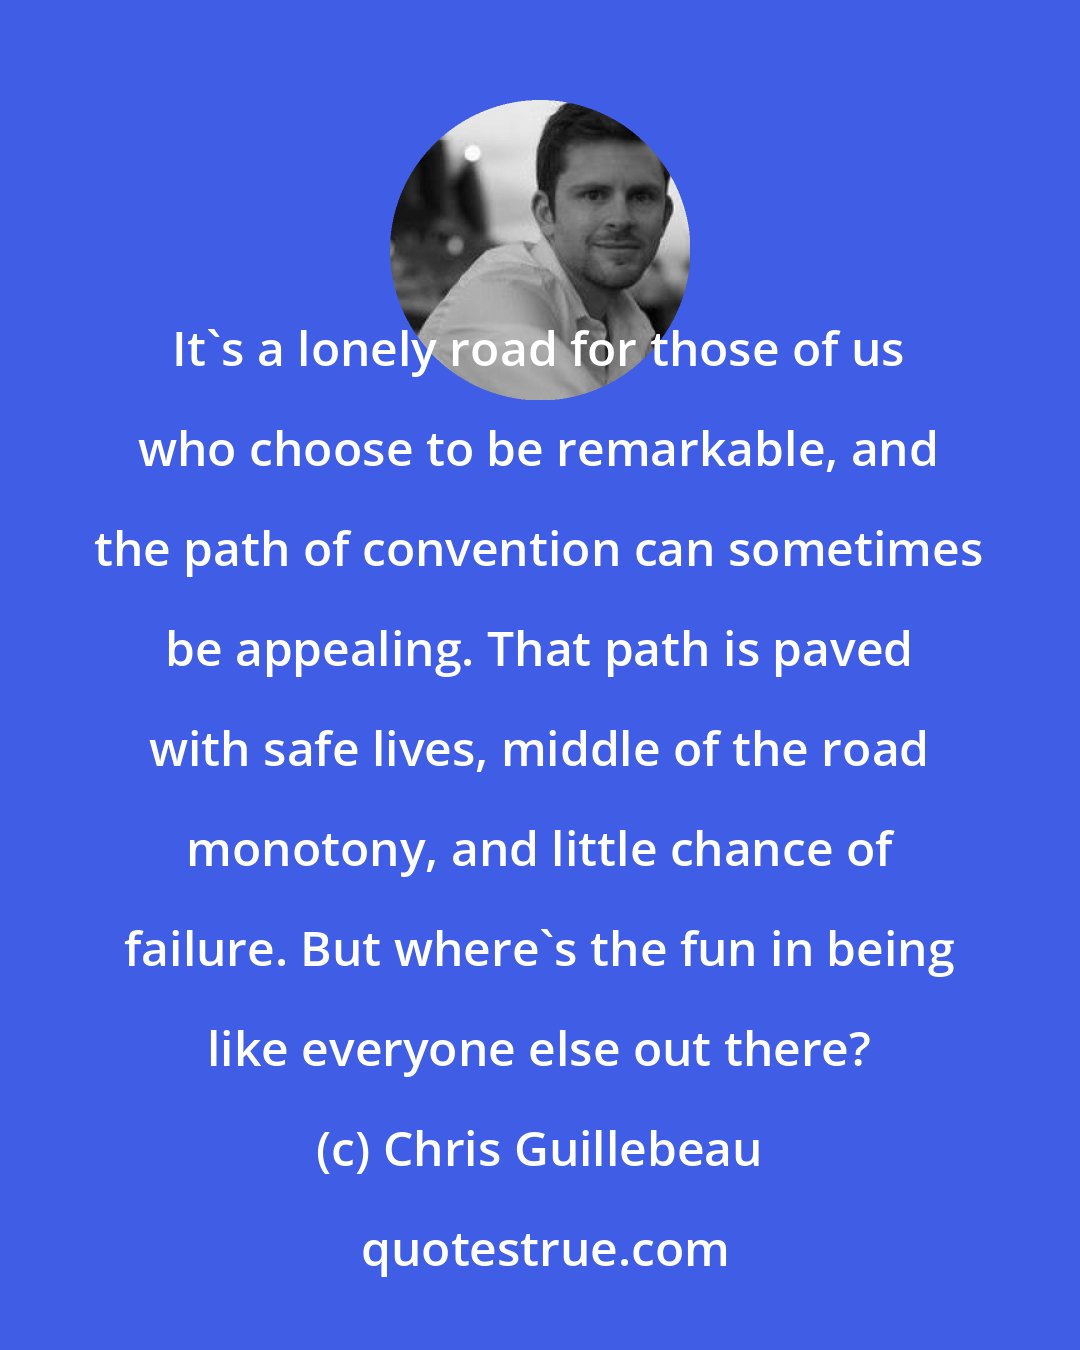 Chris Guillebeau: It's a lonely road for those of us who choose to be remarkable, and the path of convention can sometimes be appealing. That path is paved with safe lives, middle of the road monotony, and little chance of failure. But where's the fun in being like everyone else out there?